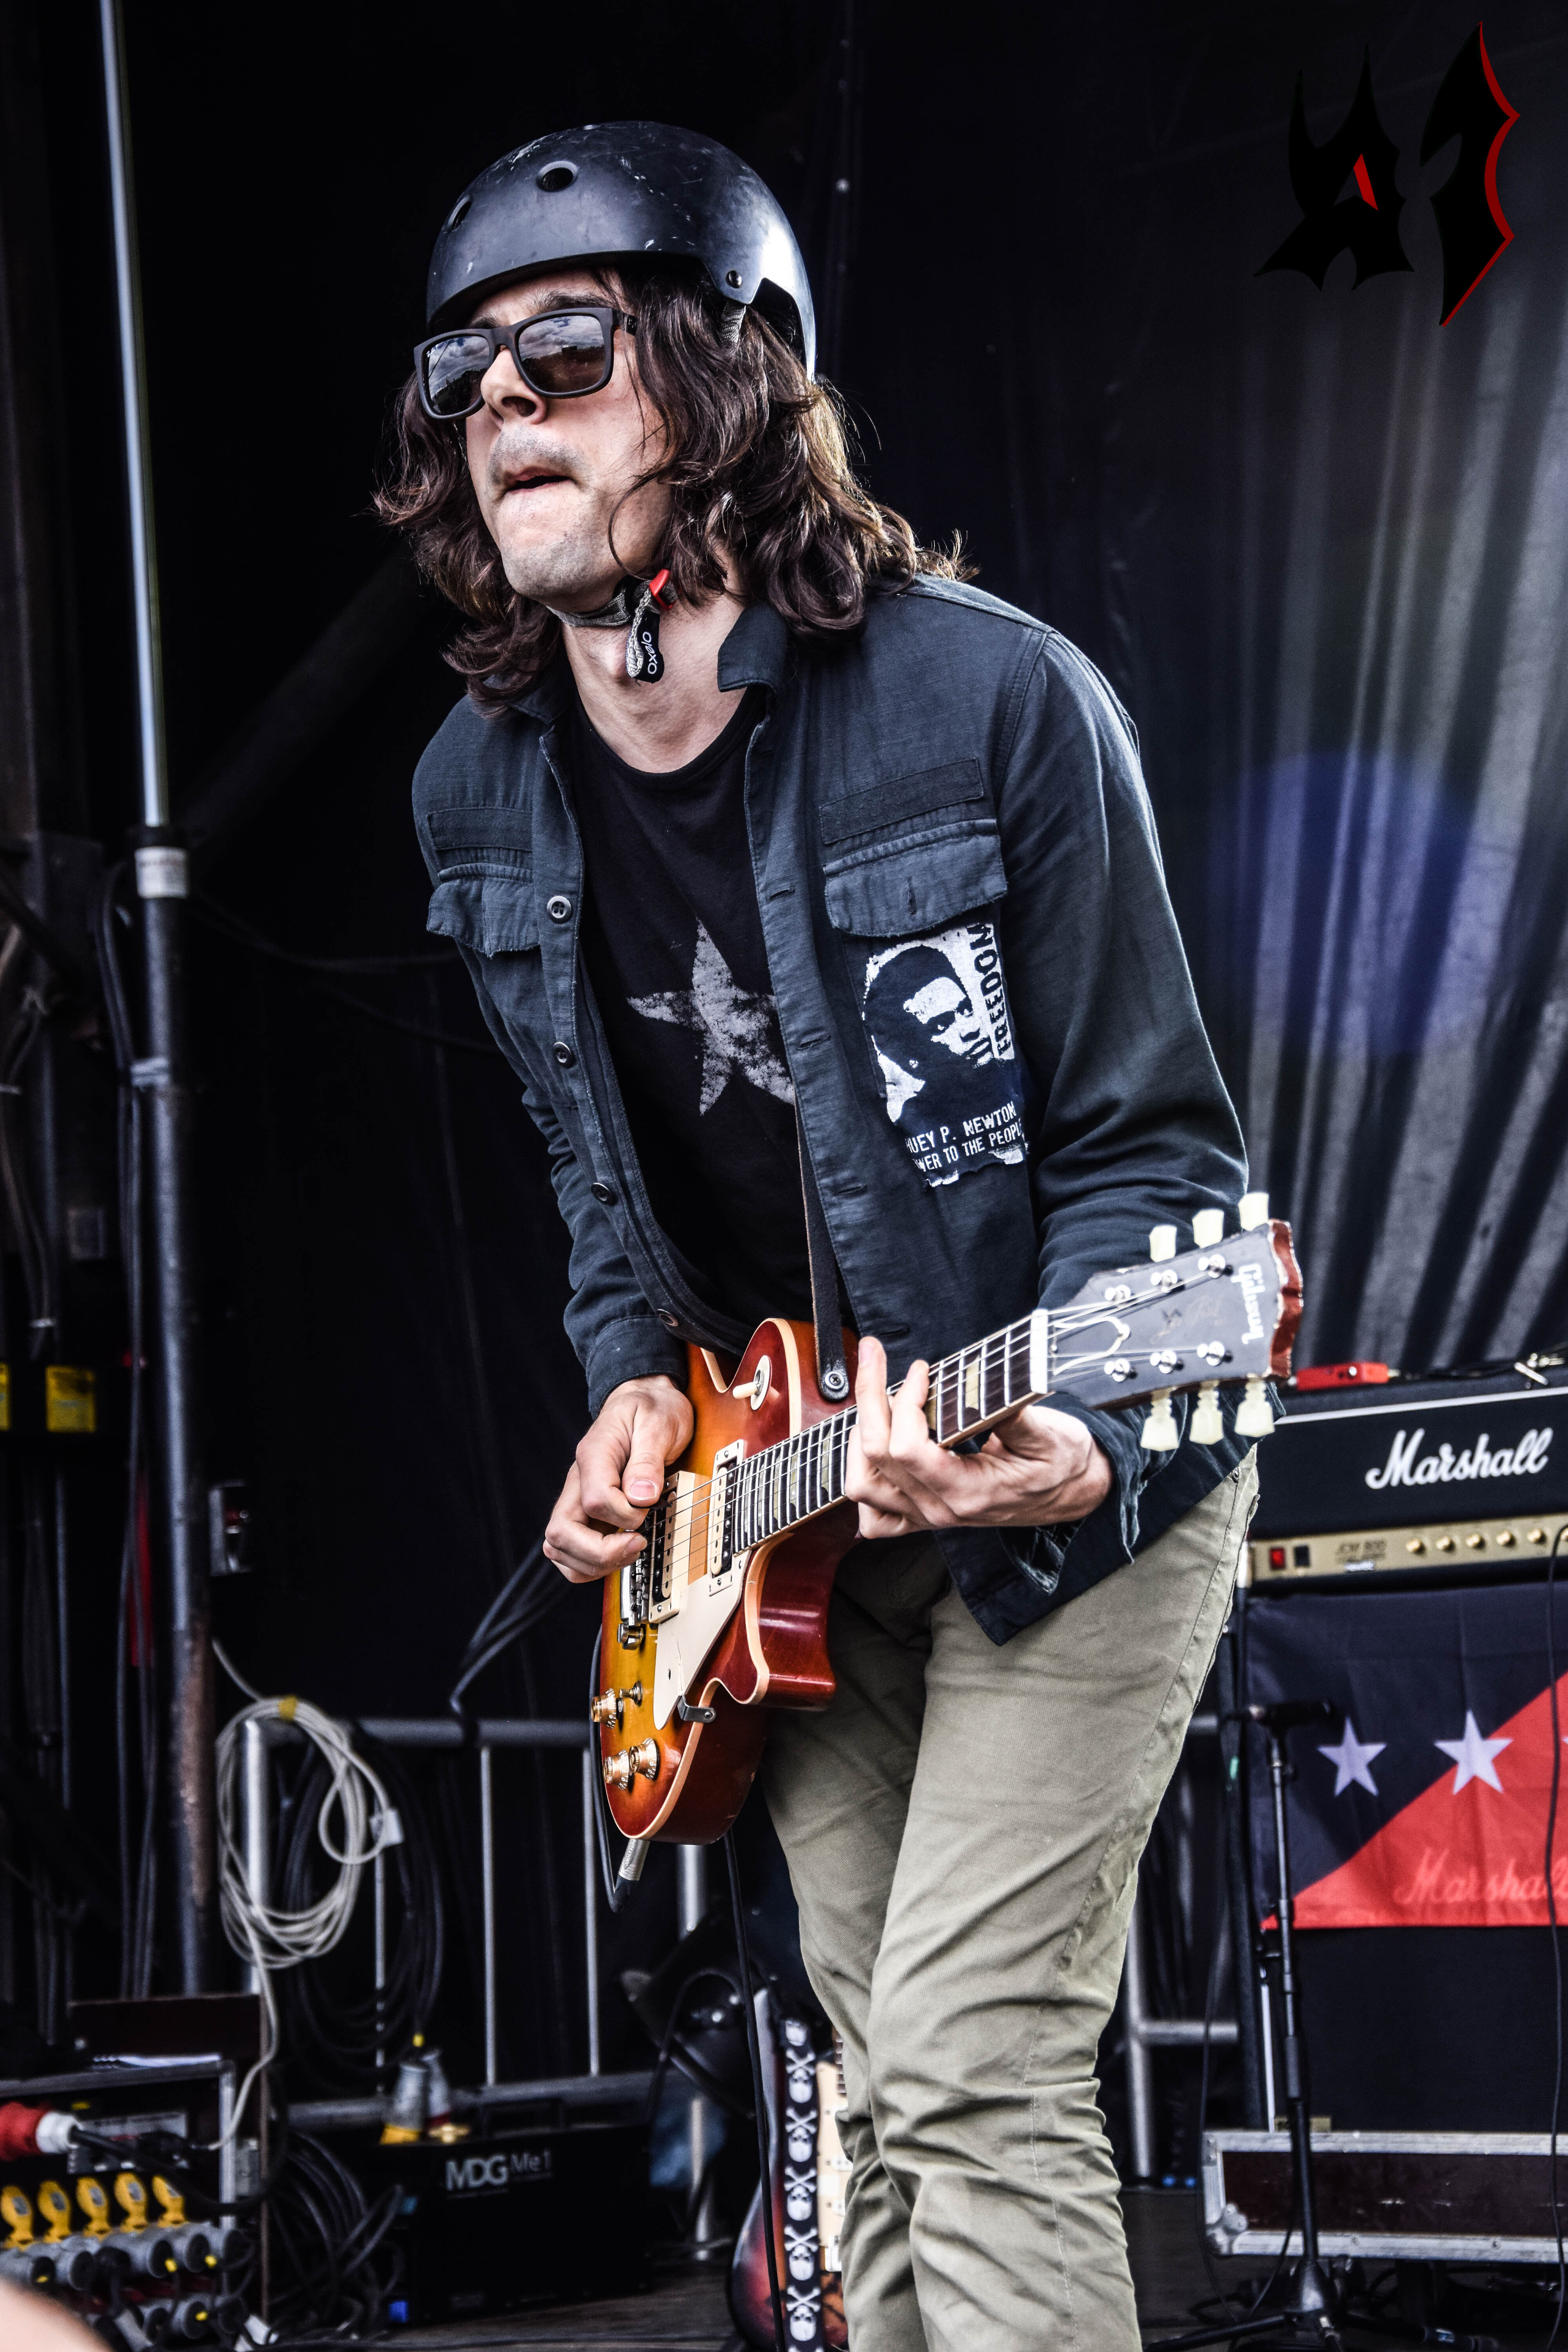 Donwload 2018 – Day 3 - The Last Internationale 5